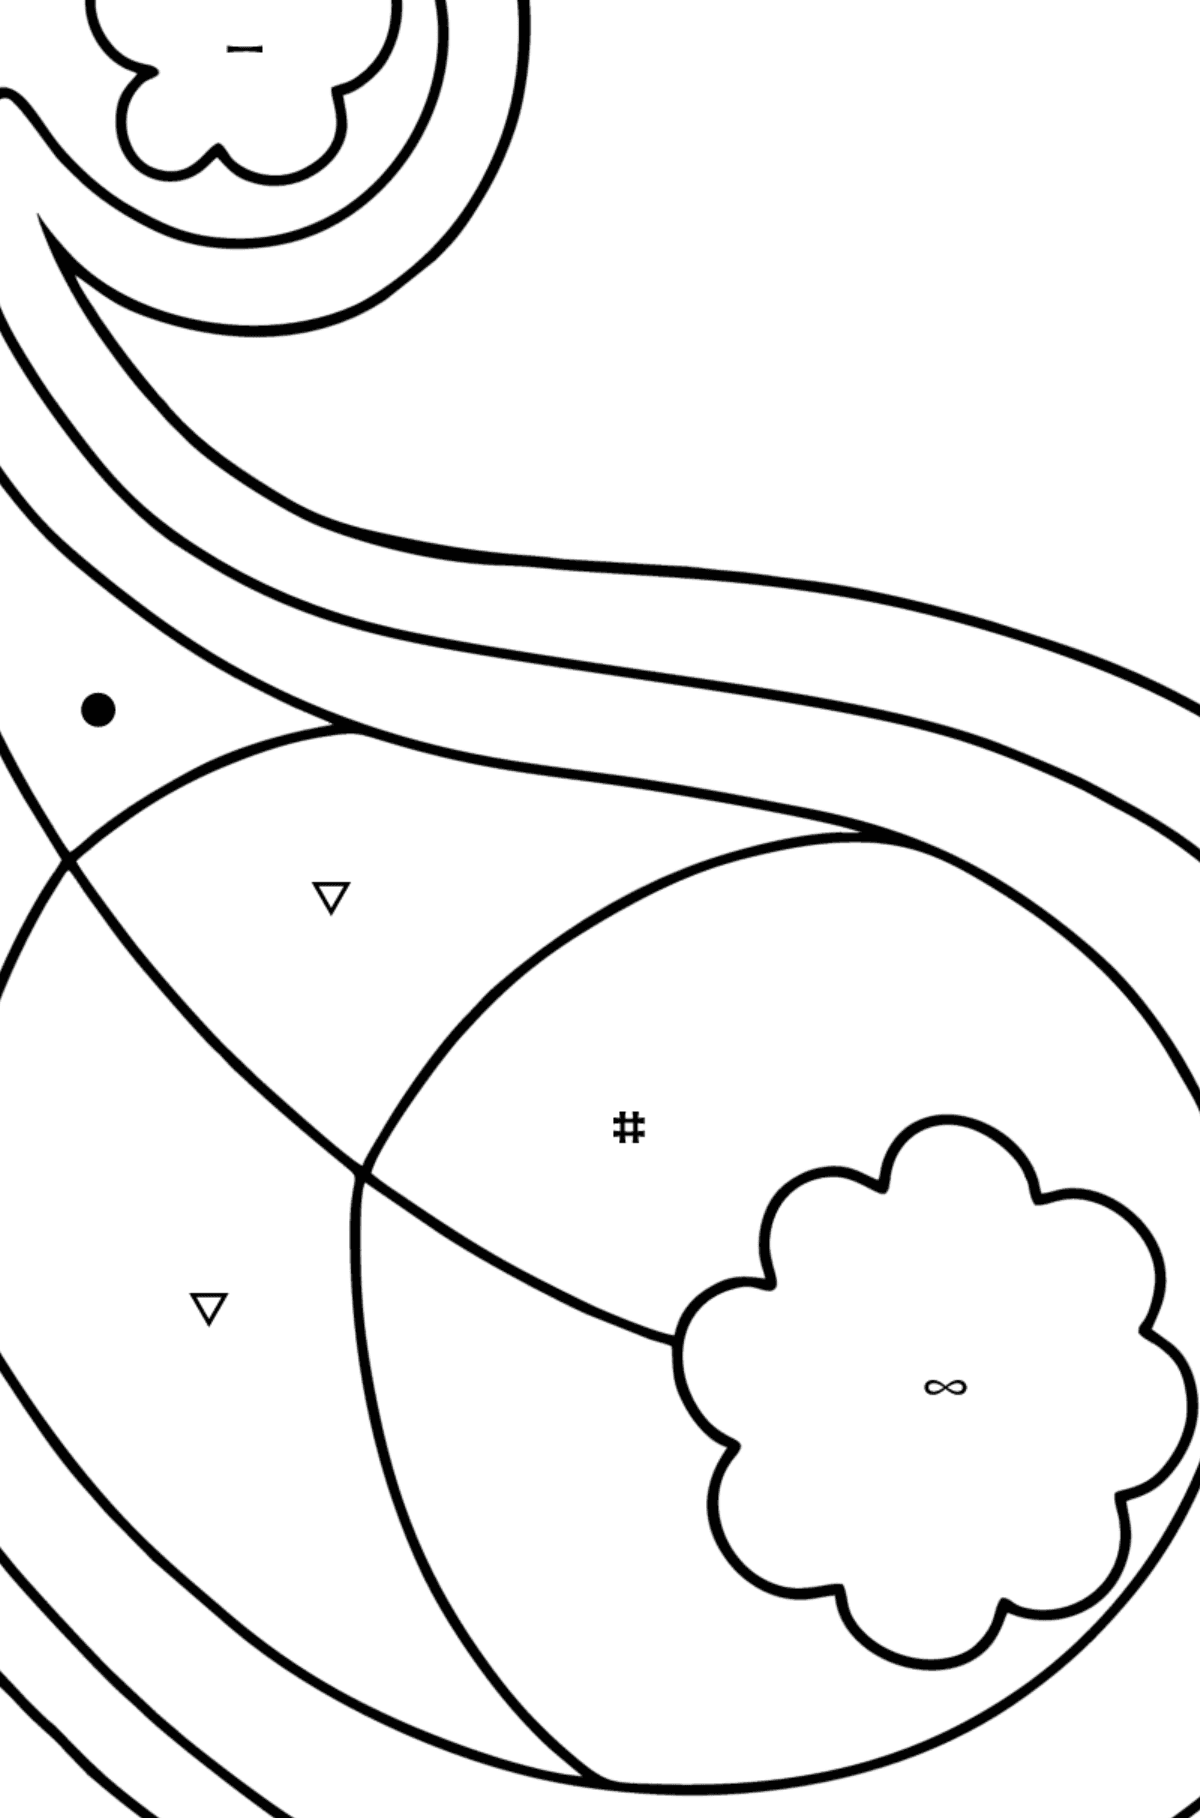 Simple Paisley coloring page - Coloring by Symbols for Kids